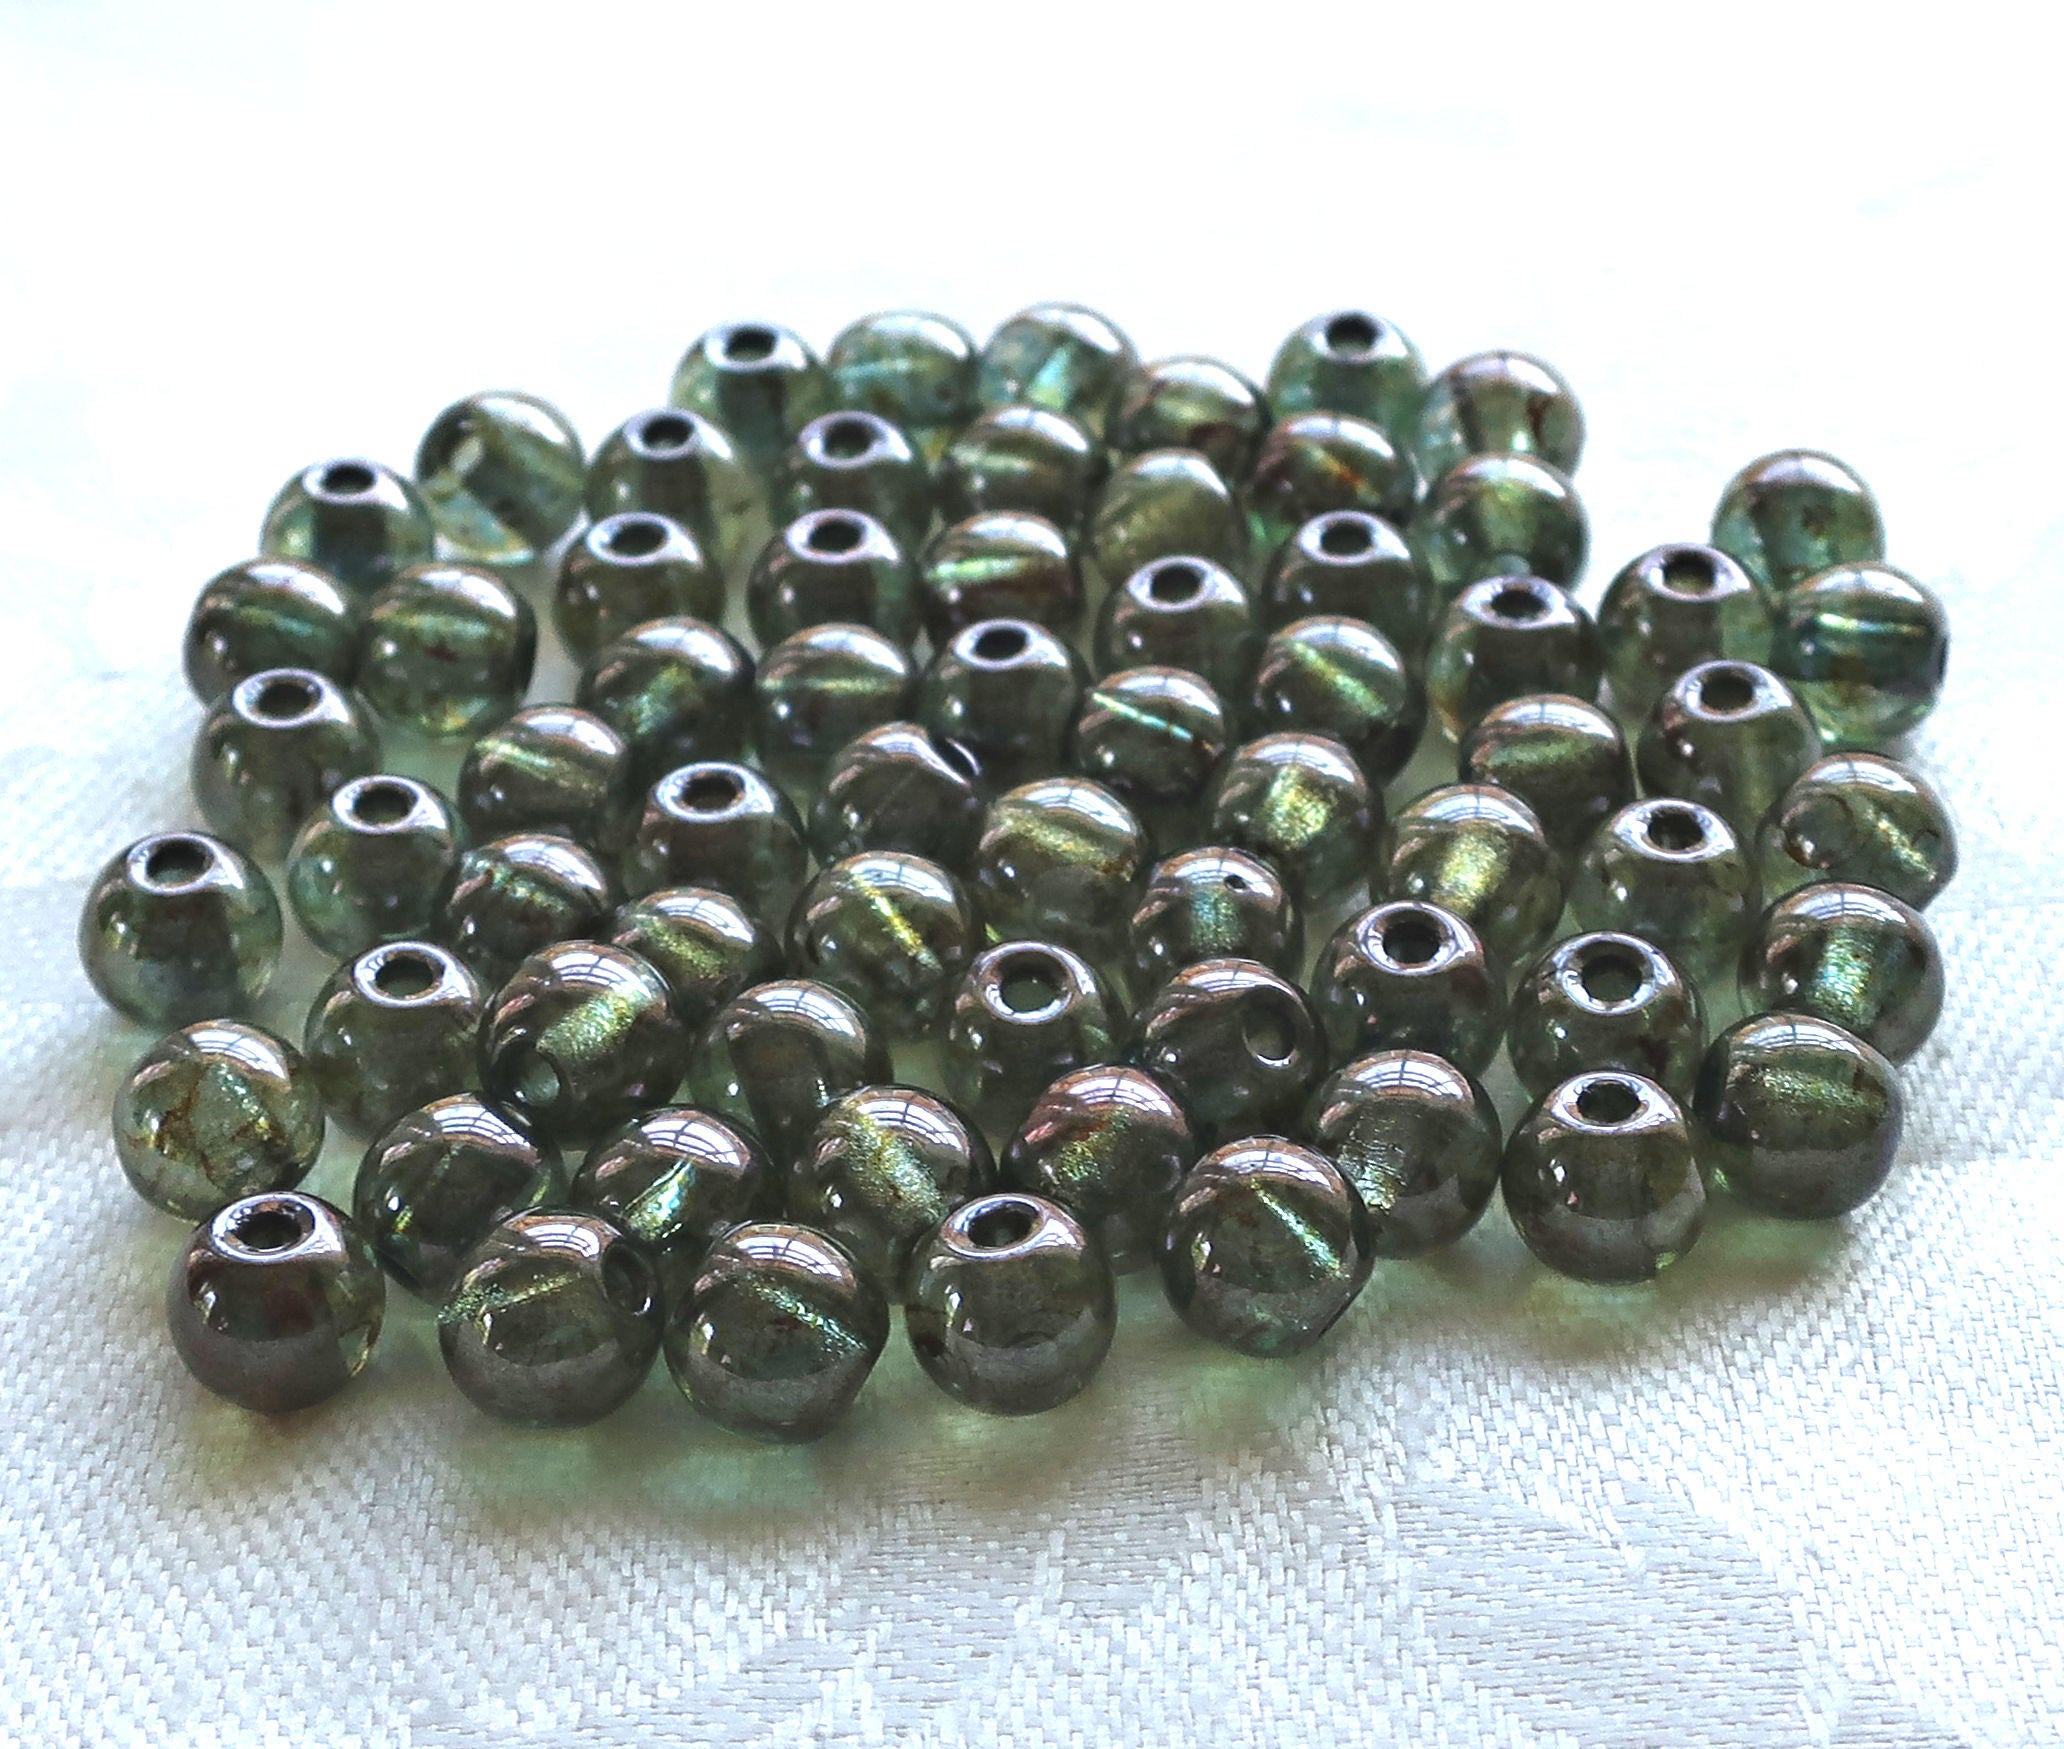 20 8mm Melon Beads 8mm Czech Glass Beads Large Hole Beads for